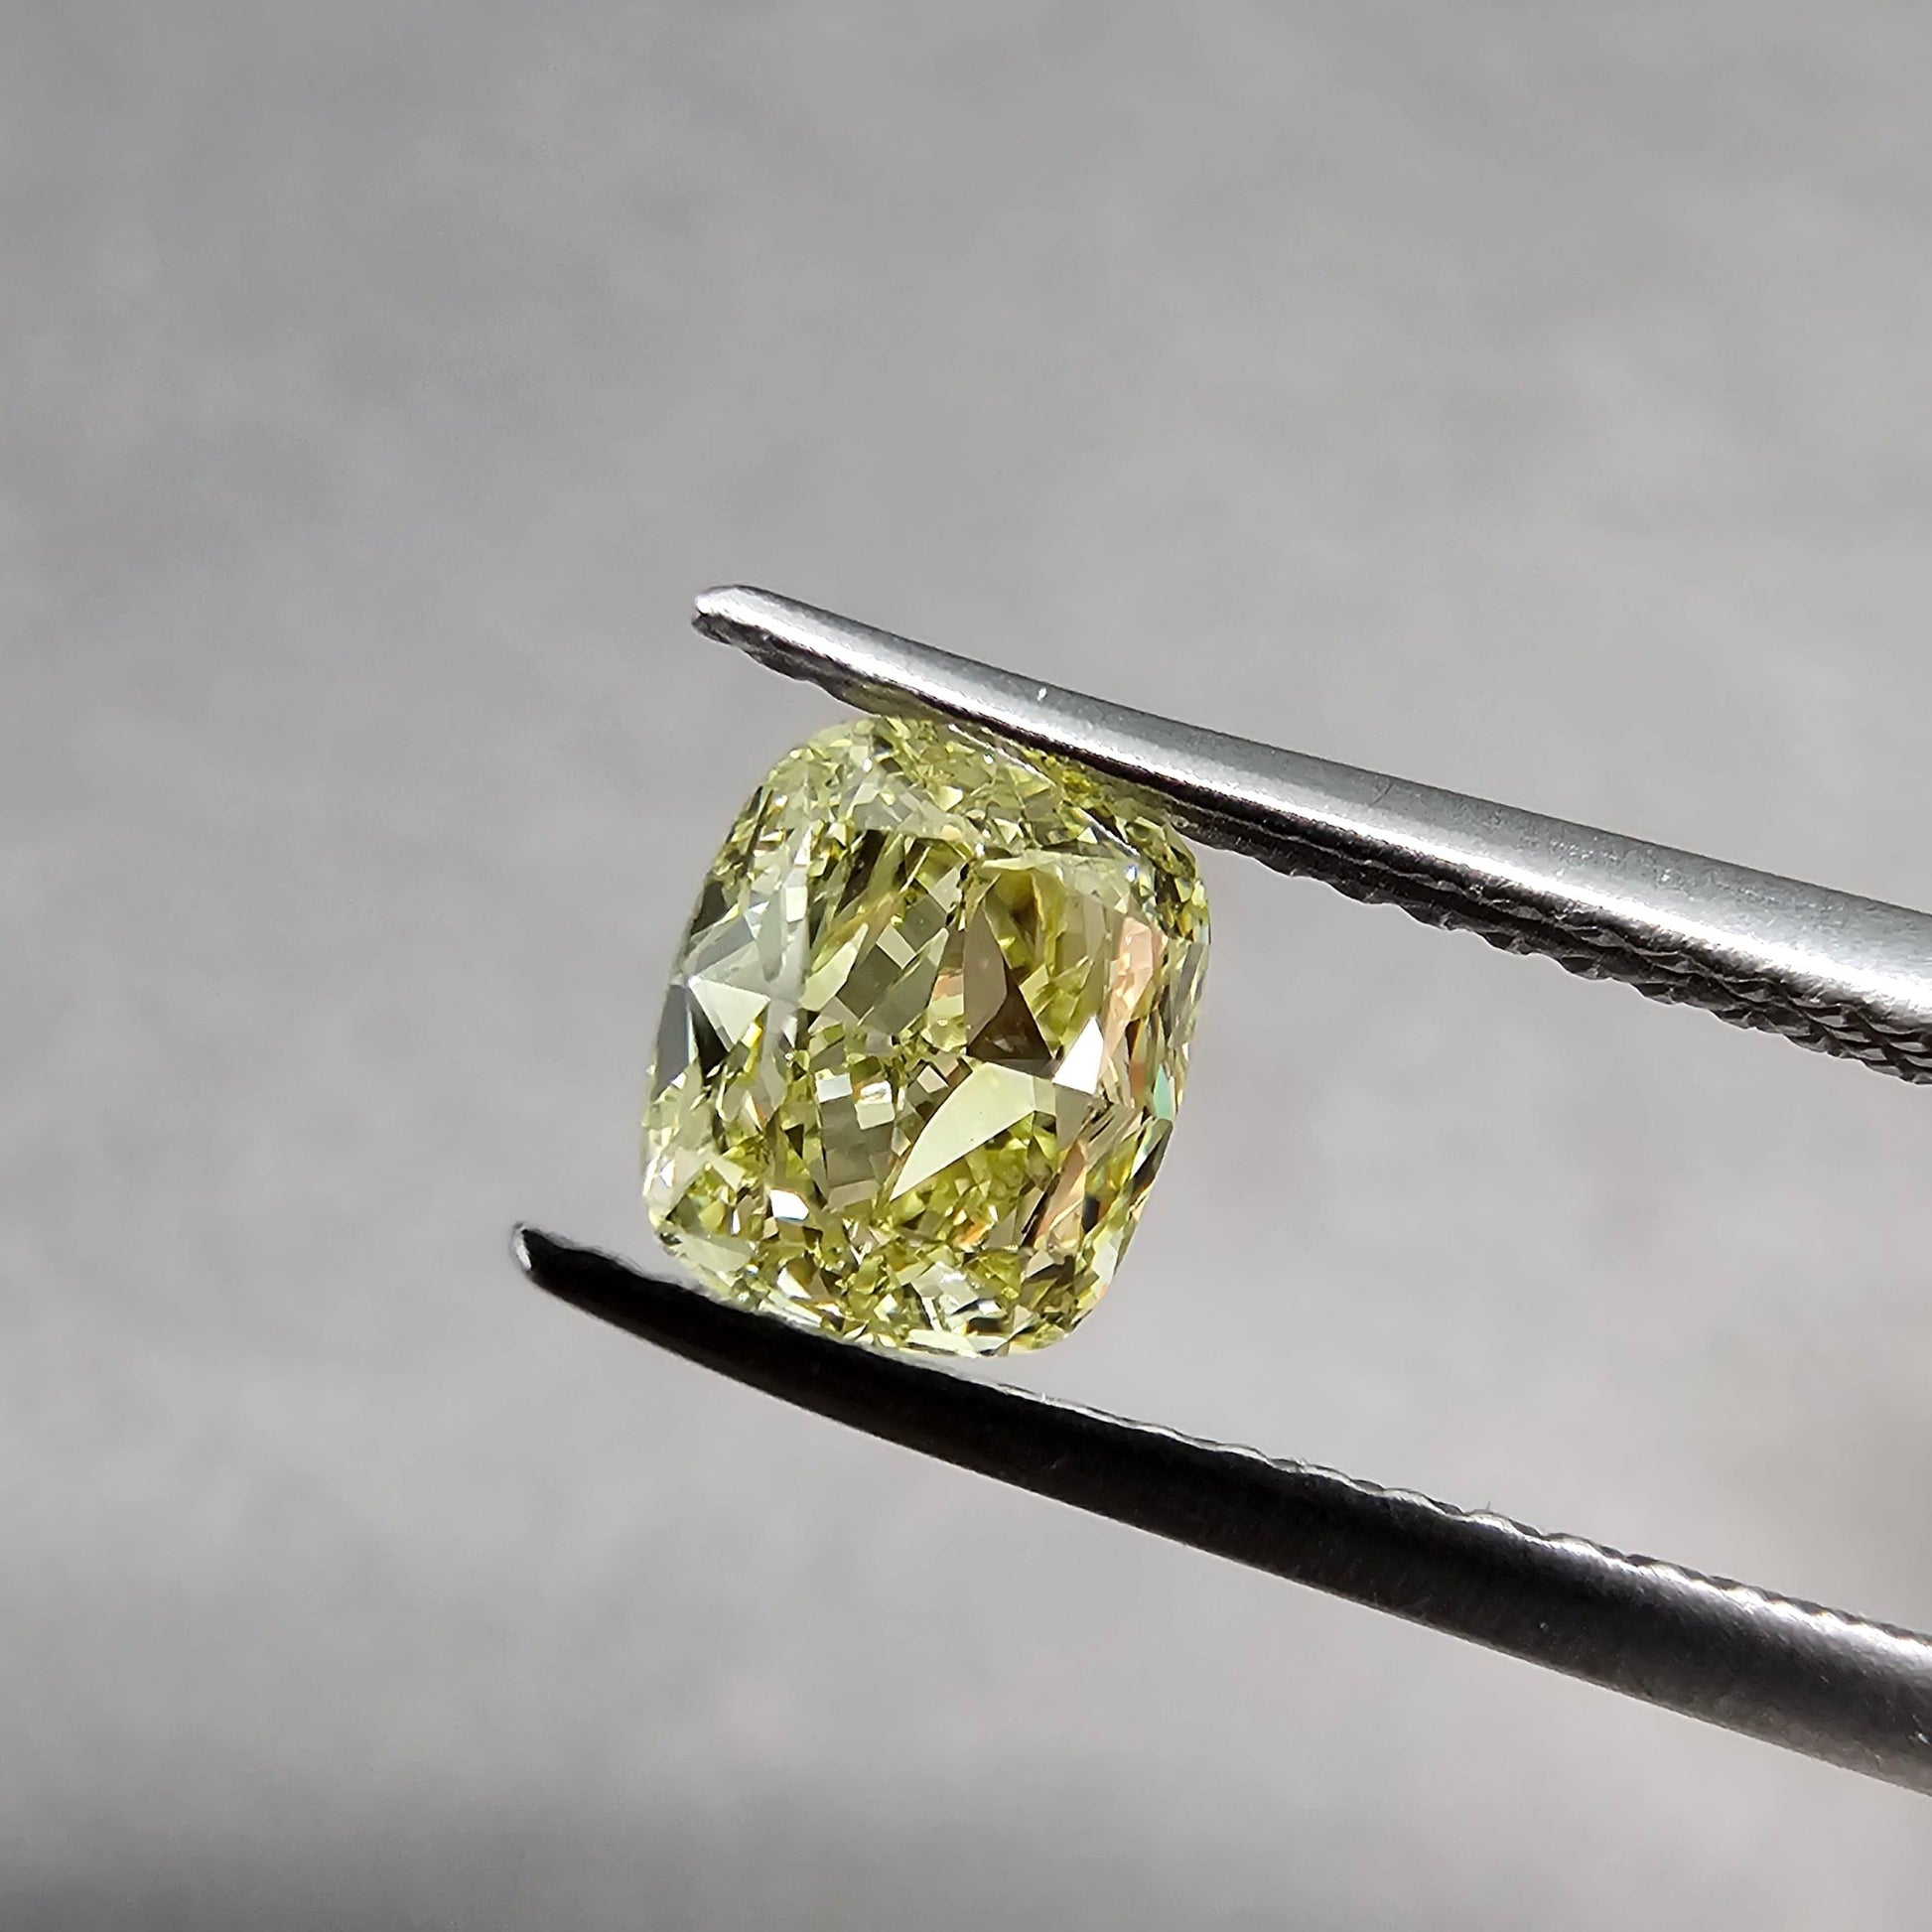 1.01 Carat Cushion Cut Diamond  GIA Certified Diamond  Fancy Yellow  VS1 Clarity  Can purchase loose or email us to turn this into your own jewelry piece!